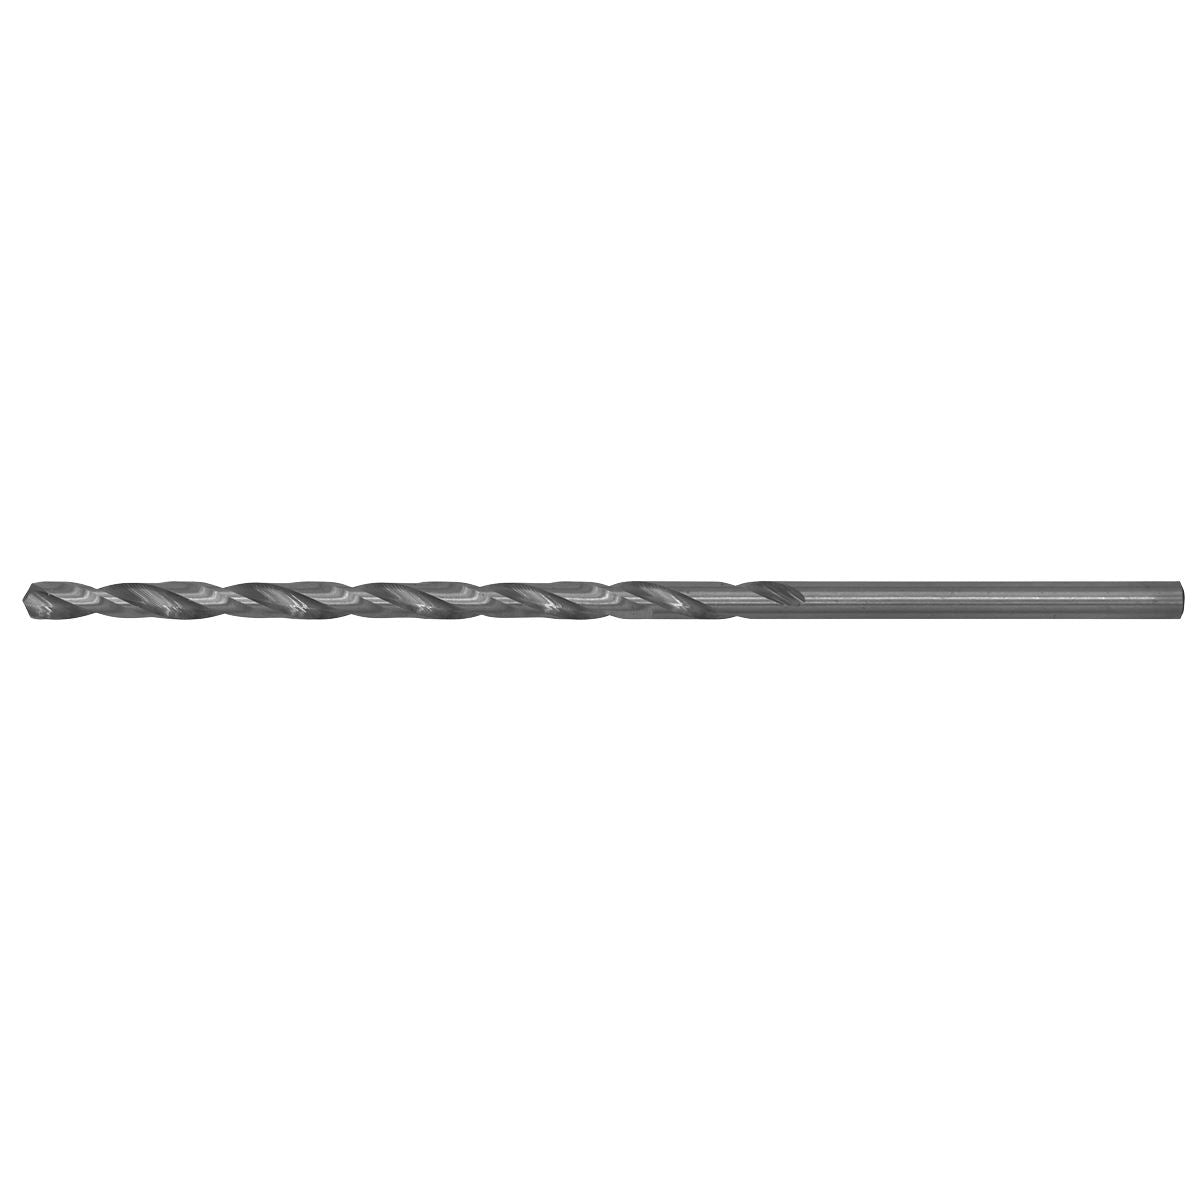 Worksafe by Sealey Long Series HSS Twist Drill Bit Ø5 x 132mm - Pack of 10